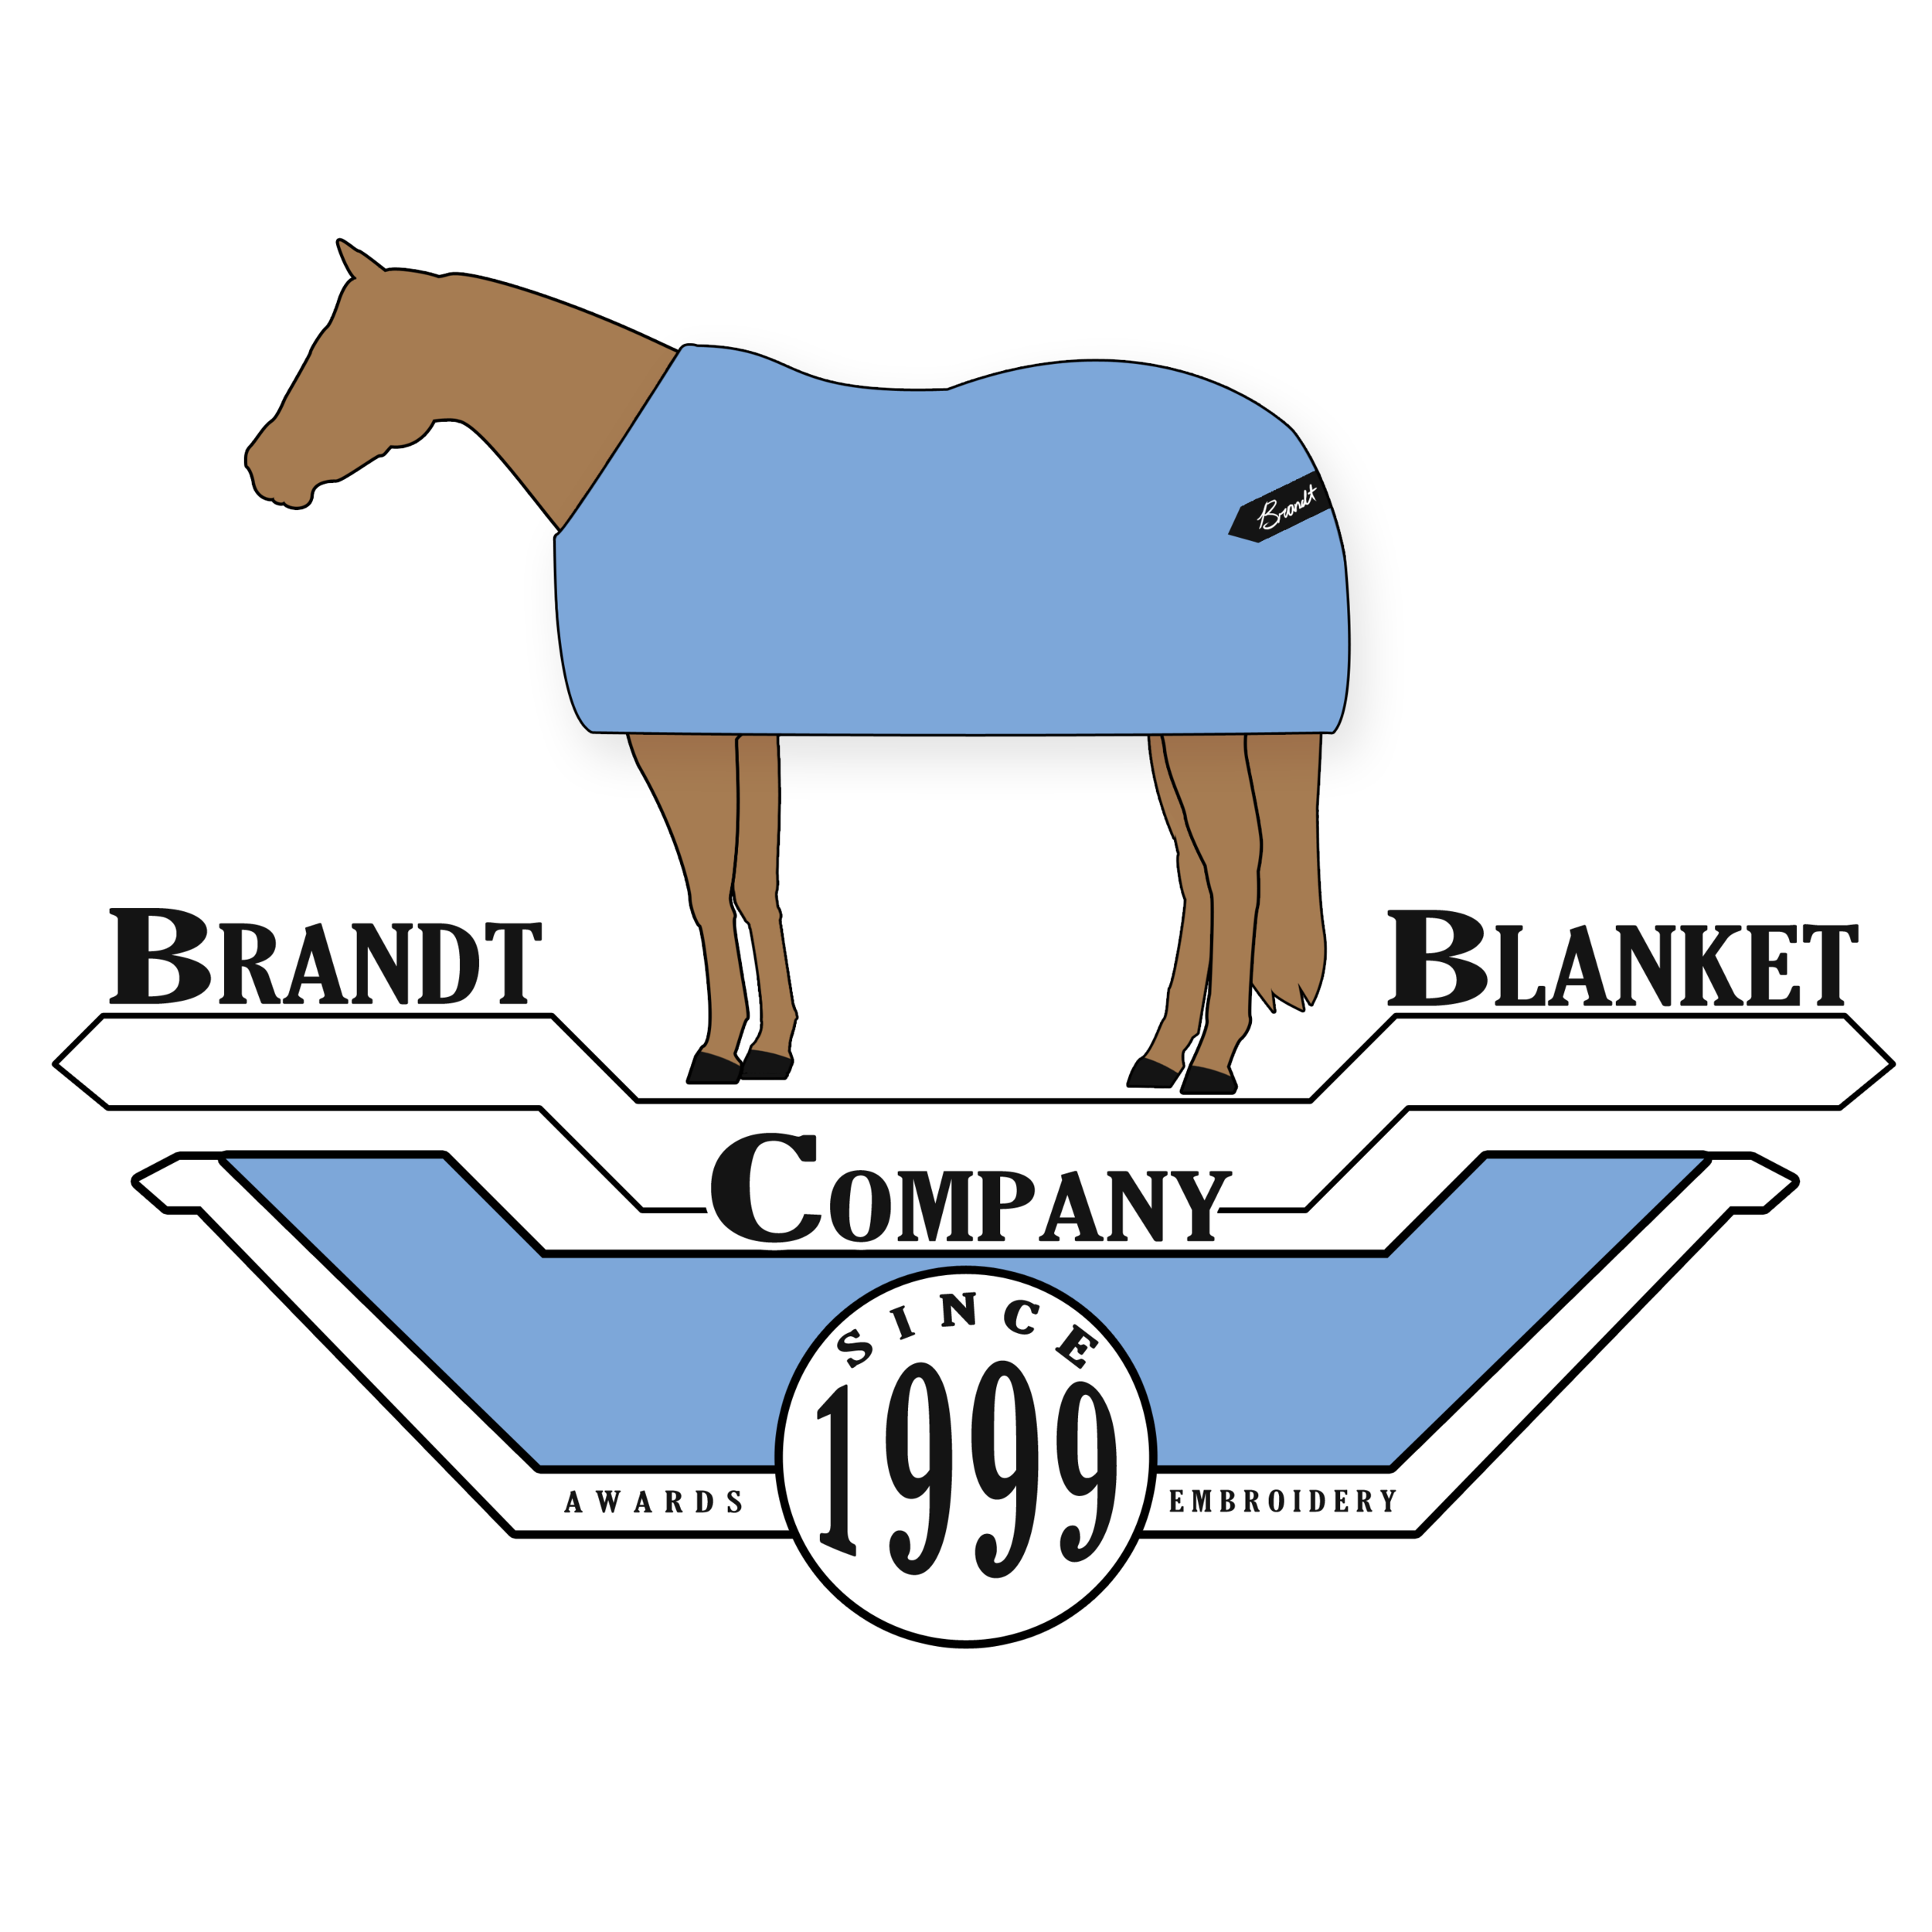 Brant Blanket Company.PNG